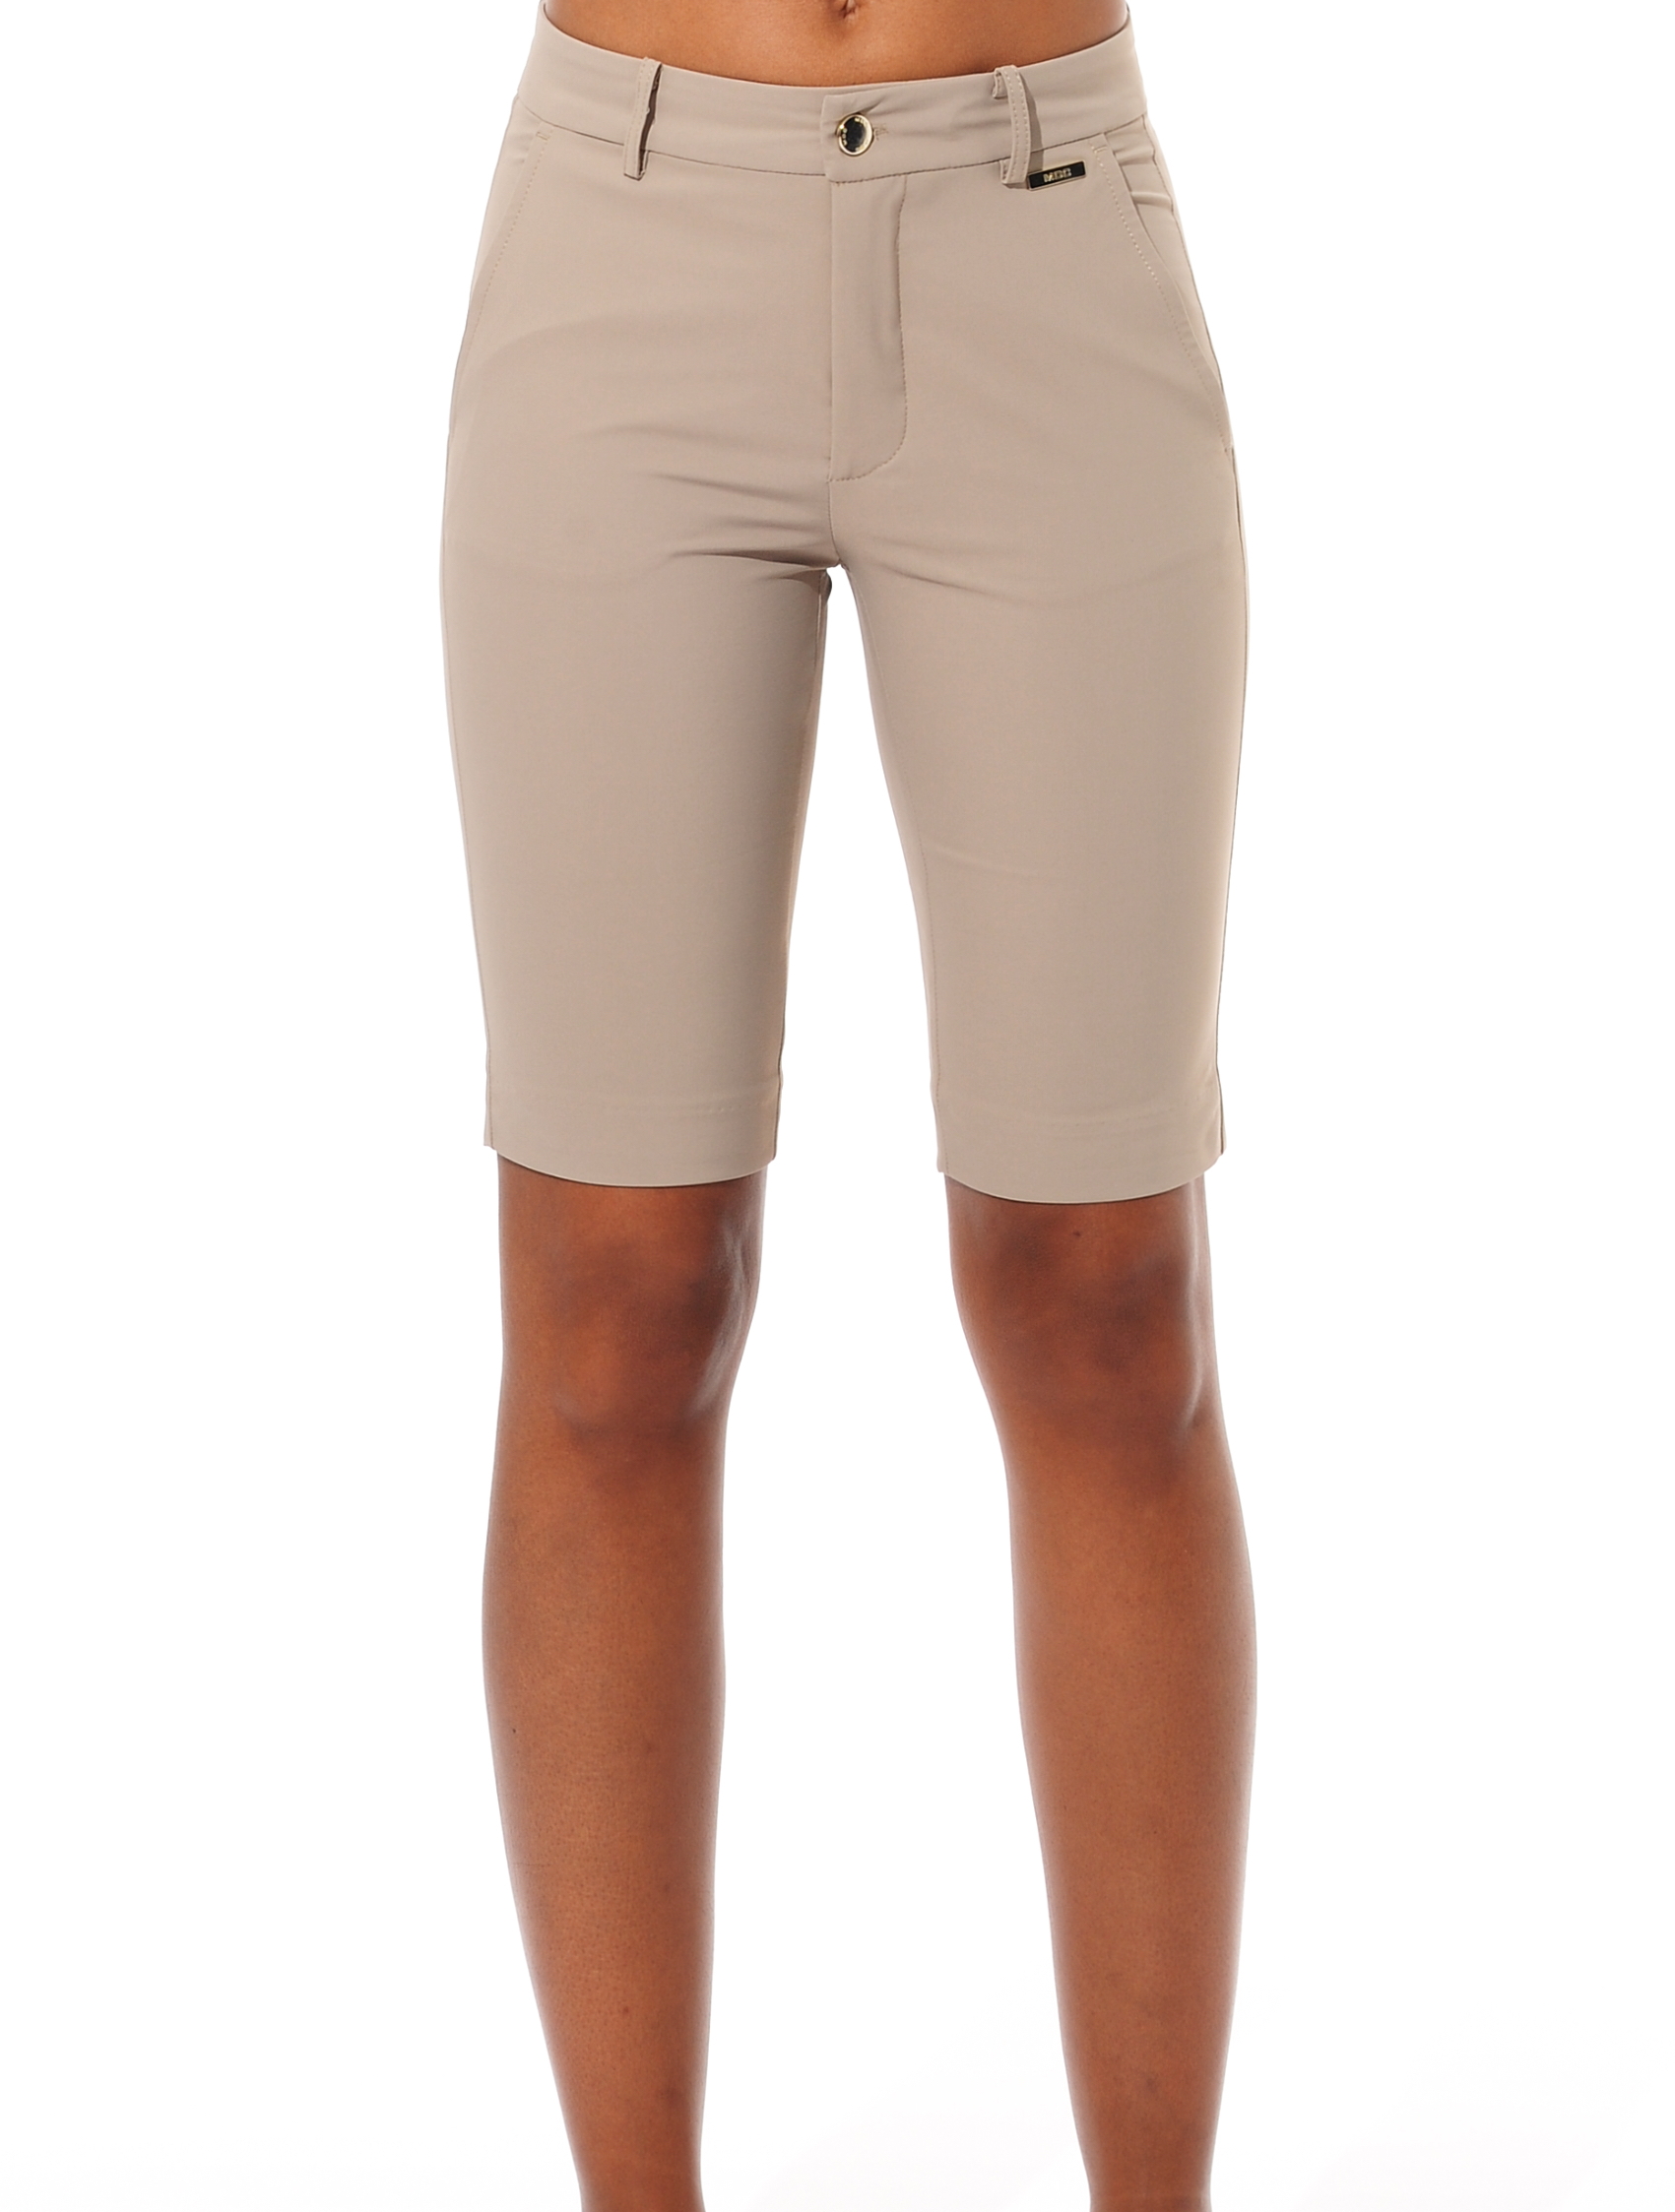 4way stretch golf shorts taupe 